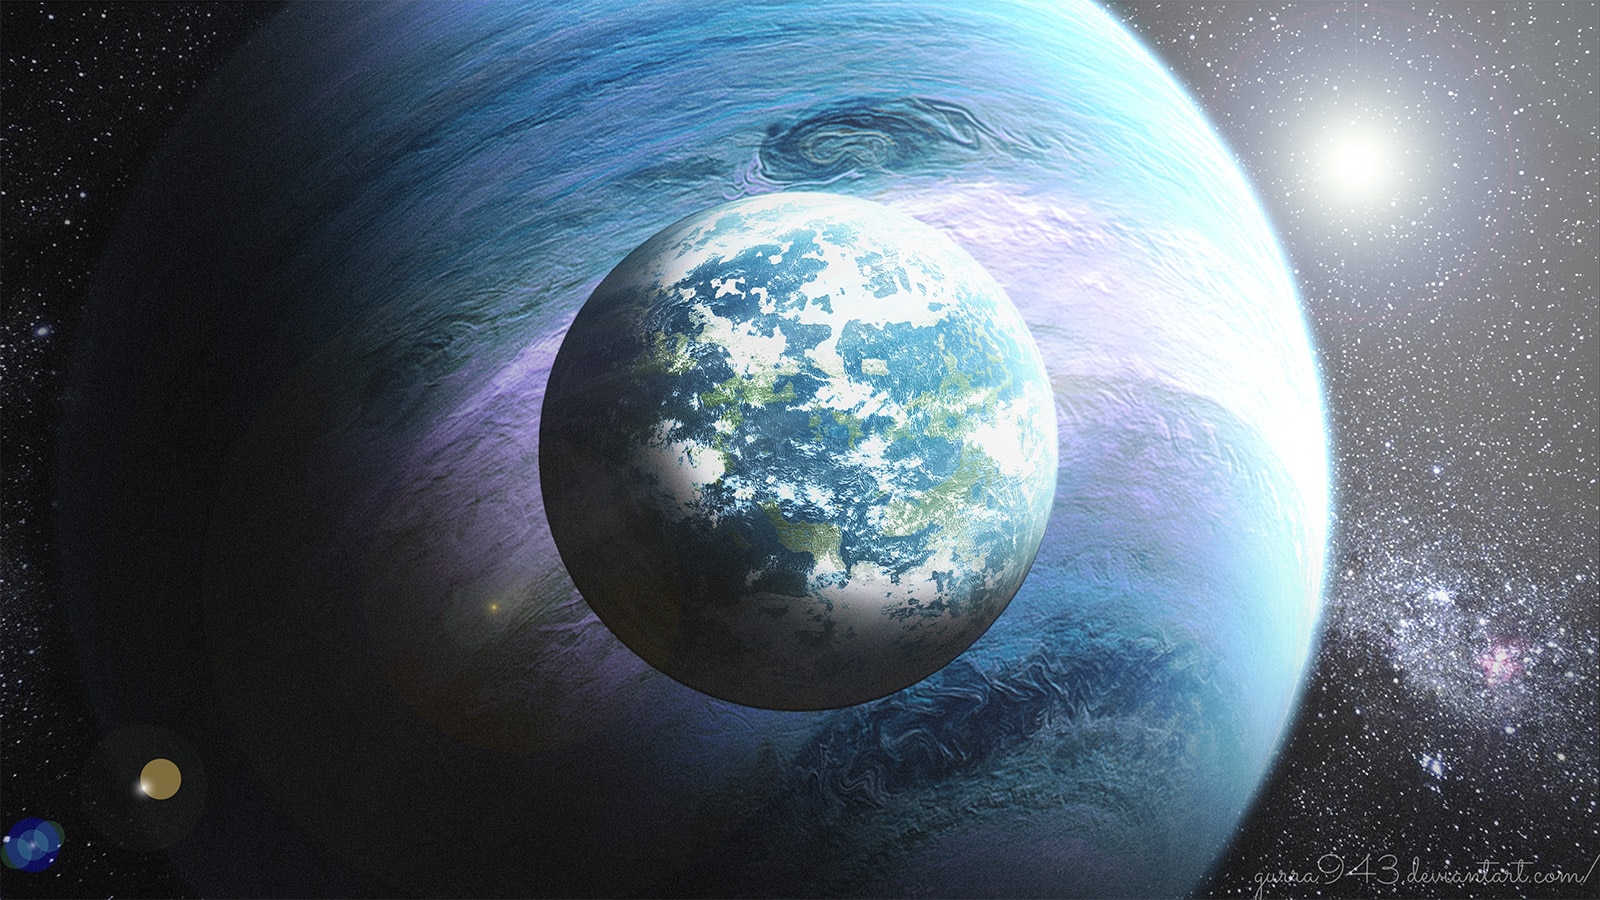 Artwork depicting a gas giant exoplanet with a terrestrial moon. Credit: NASA / Gurra943 on DeviantArt